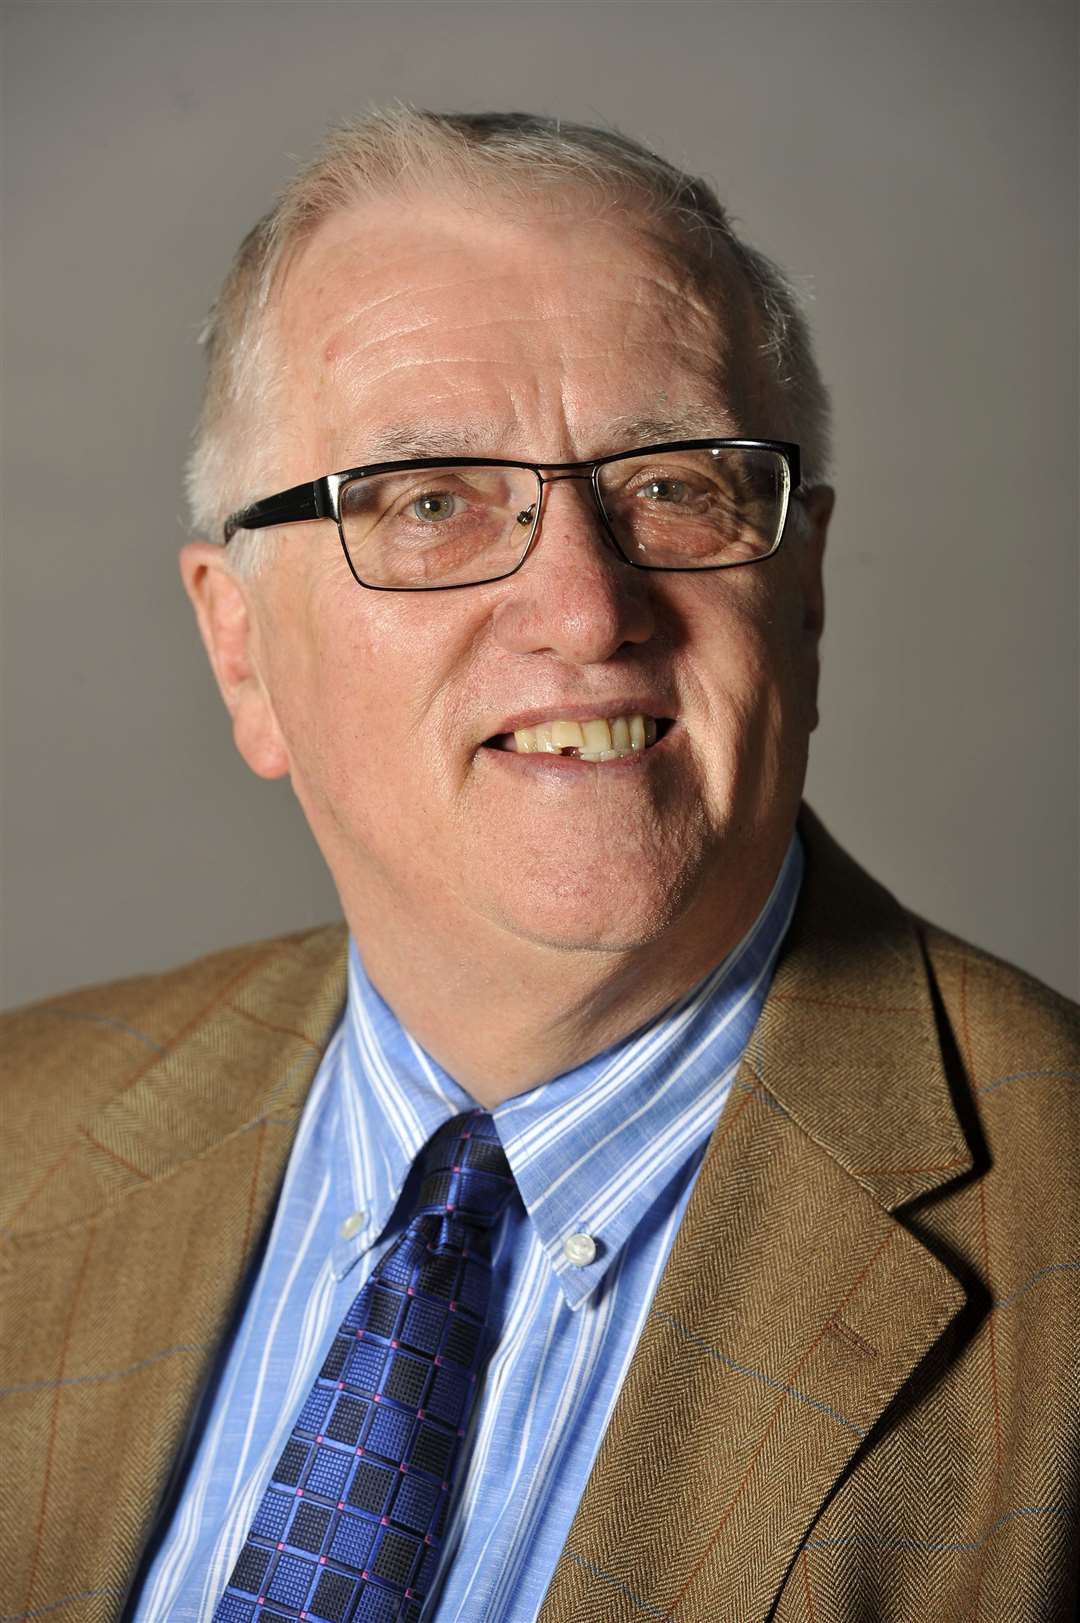 Cllr Howard Doe, Medway Council’s portfolio holder for housing and community services